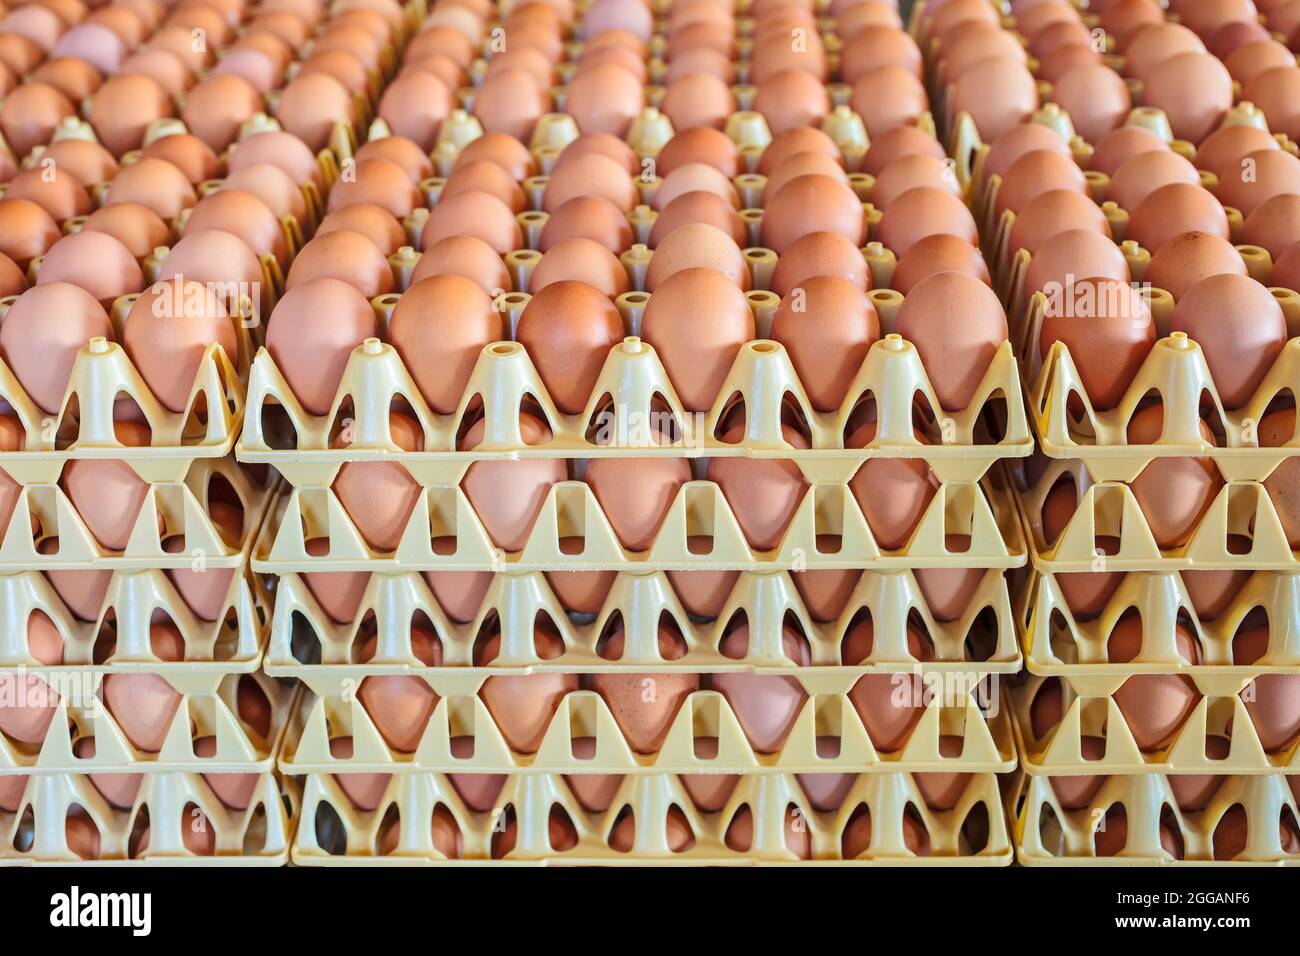 Plastic crates with fresh white and brown eggs on an organic chicken farm Stock Photo